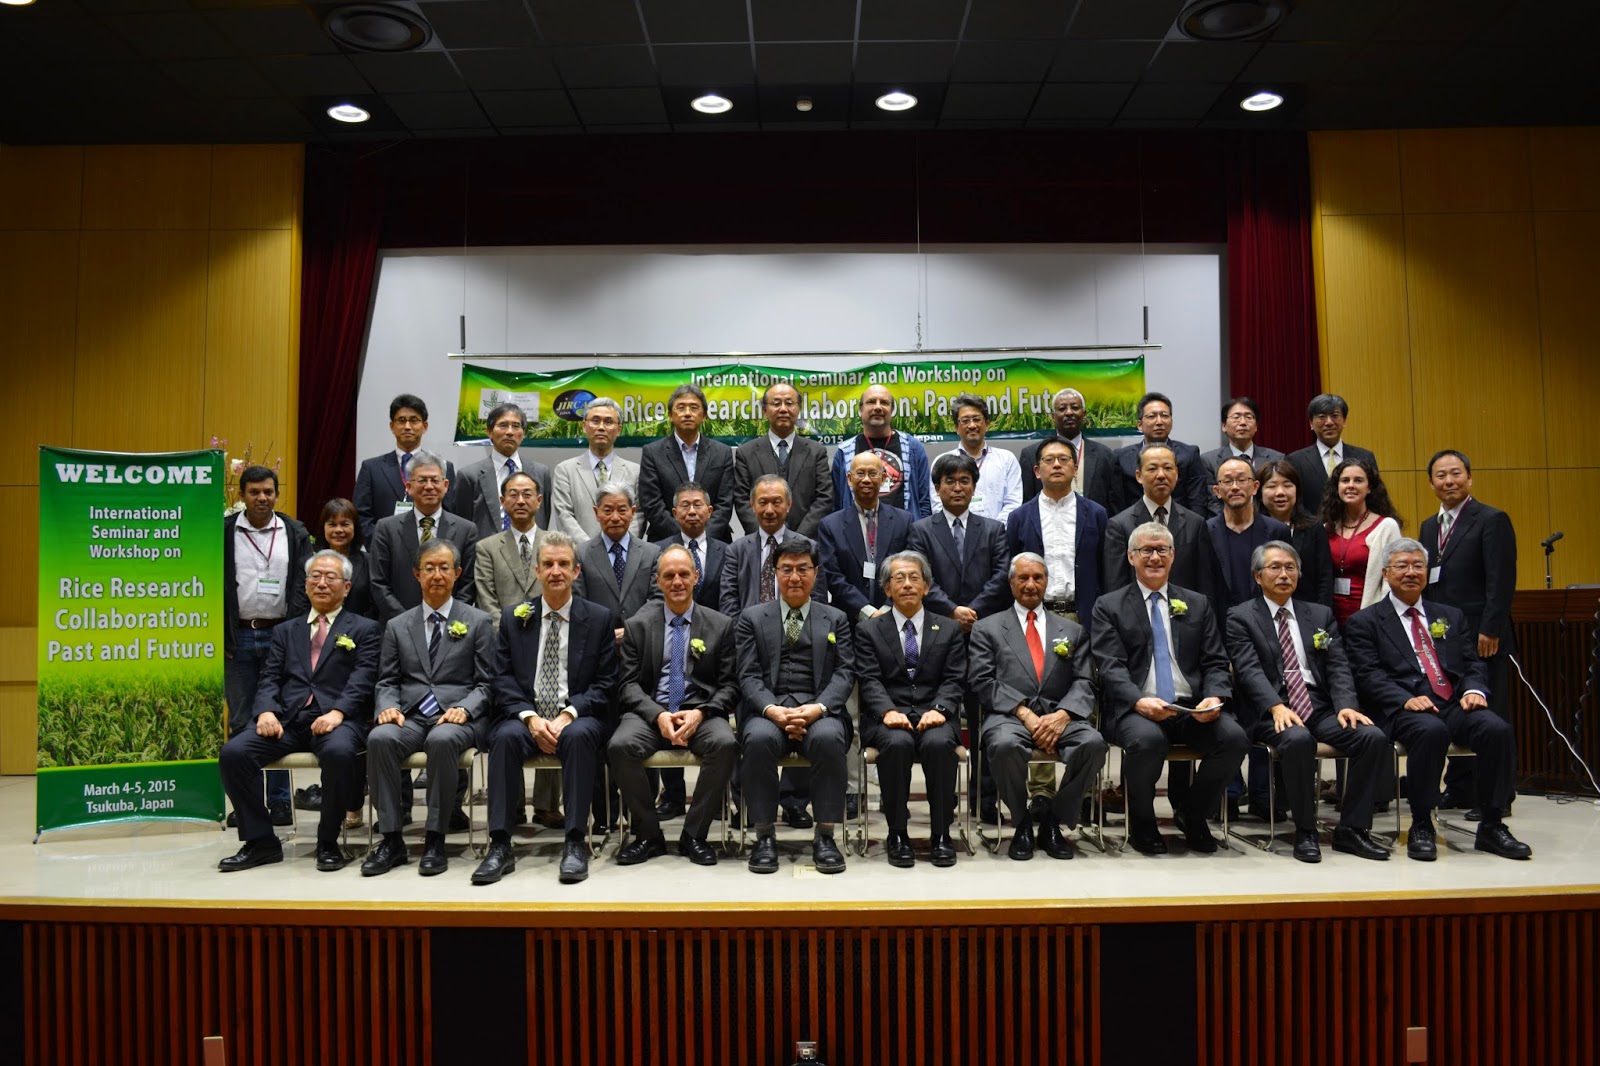 Agricultural Partnership between Japan and the Philippines